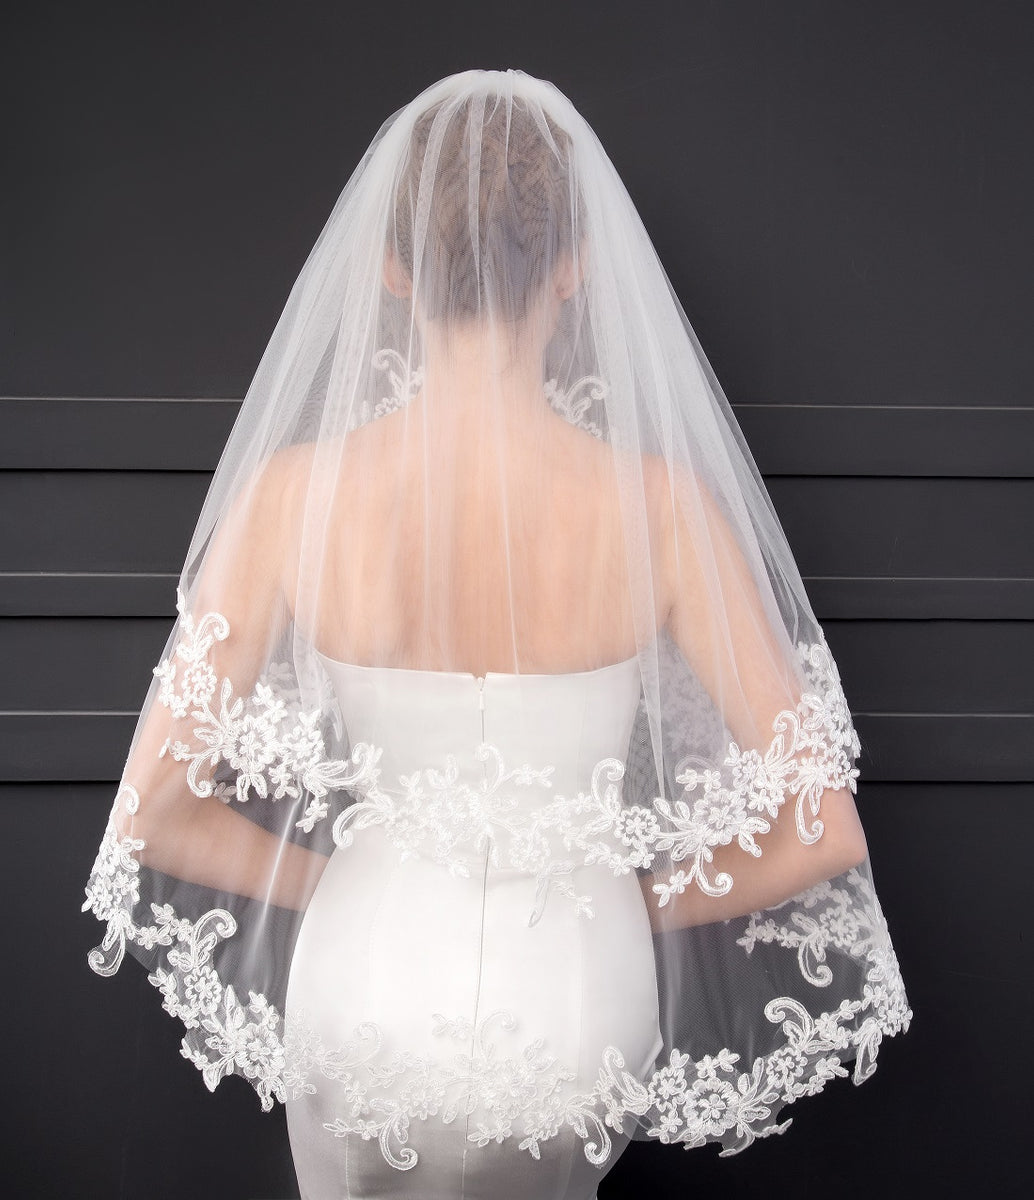 CSYPJYT Women's 2 Tier White Simple Short Wedding Bridal Veil With Comb